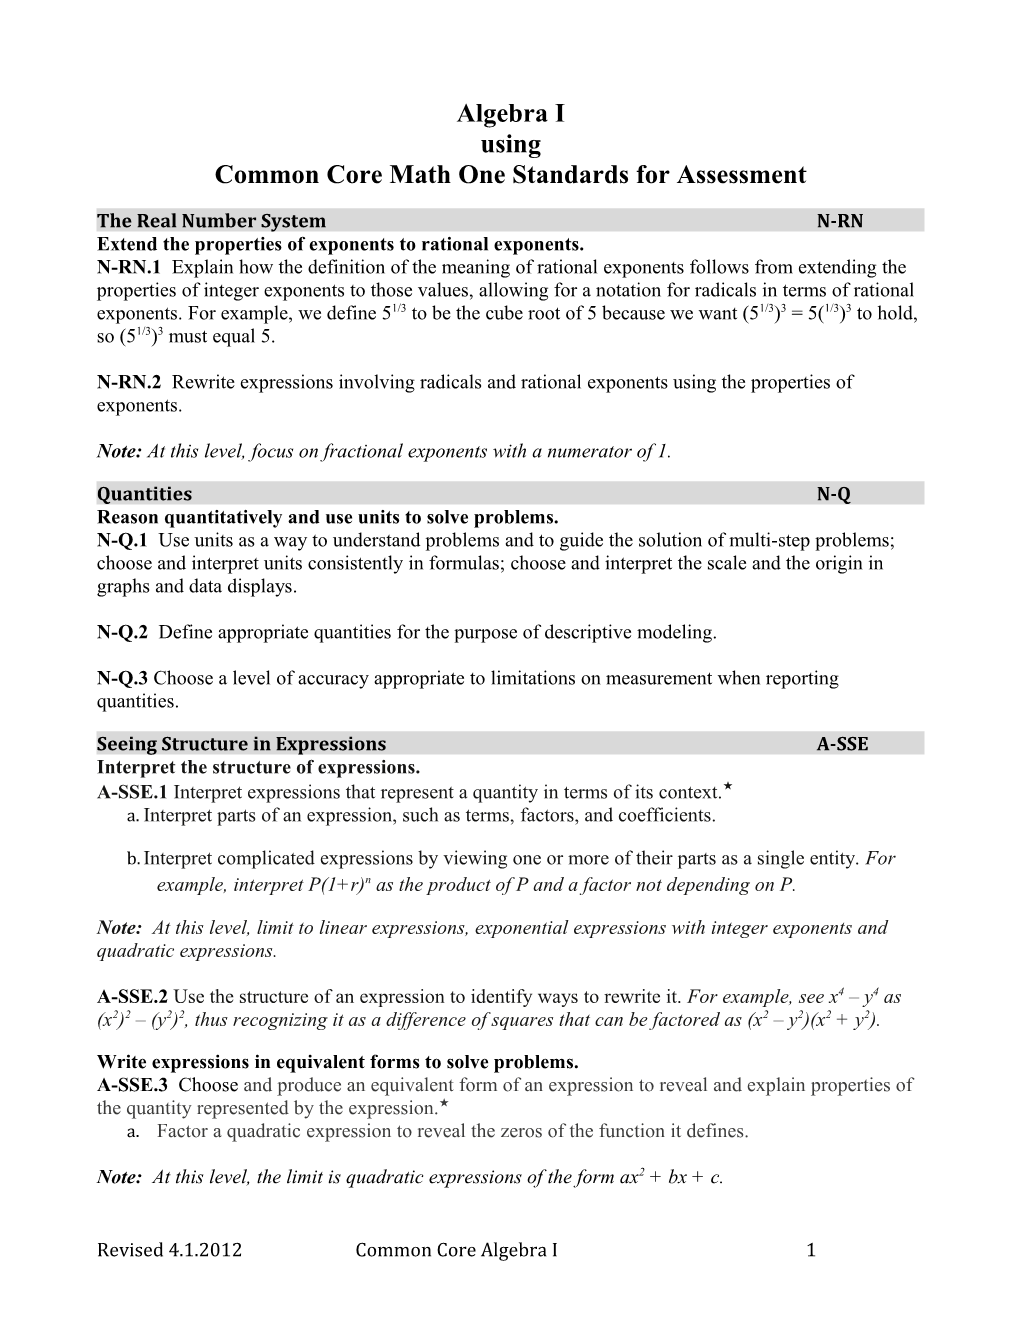 Common Core Math One Standards for Assessment